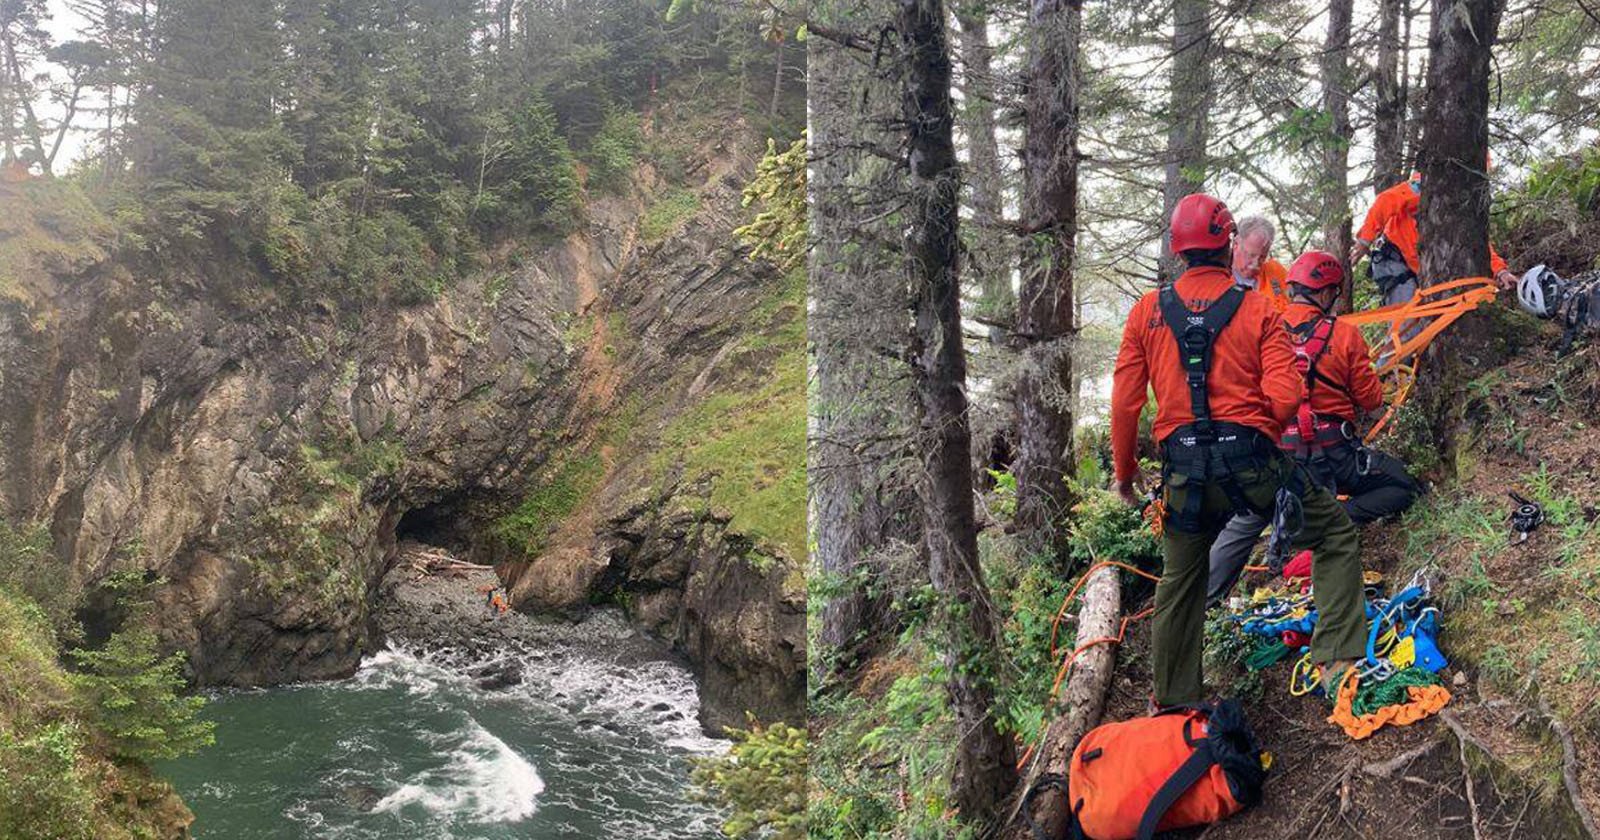 Landscape Photographer Dies Falling From 300-Foot Cliff in Oregon